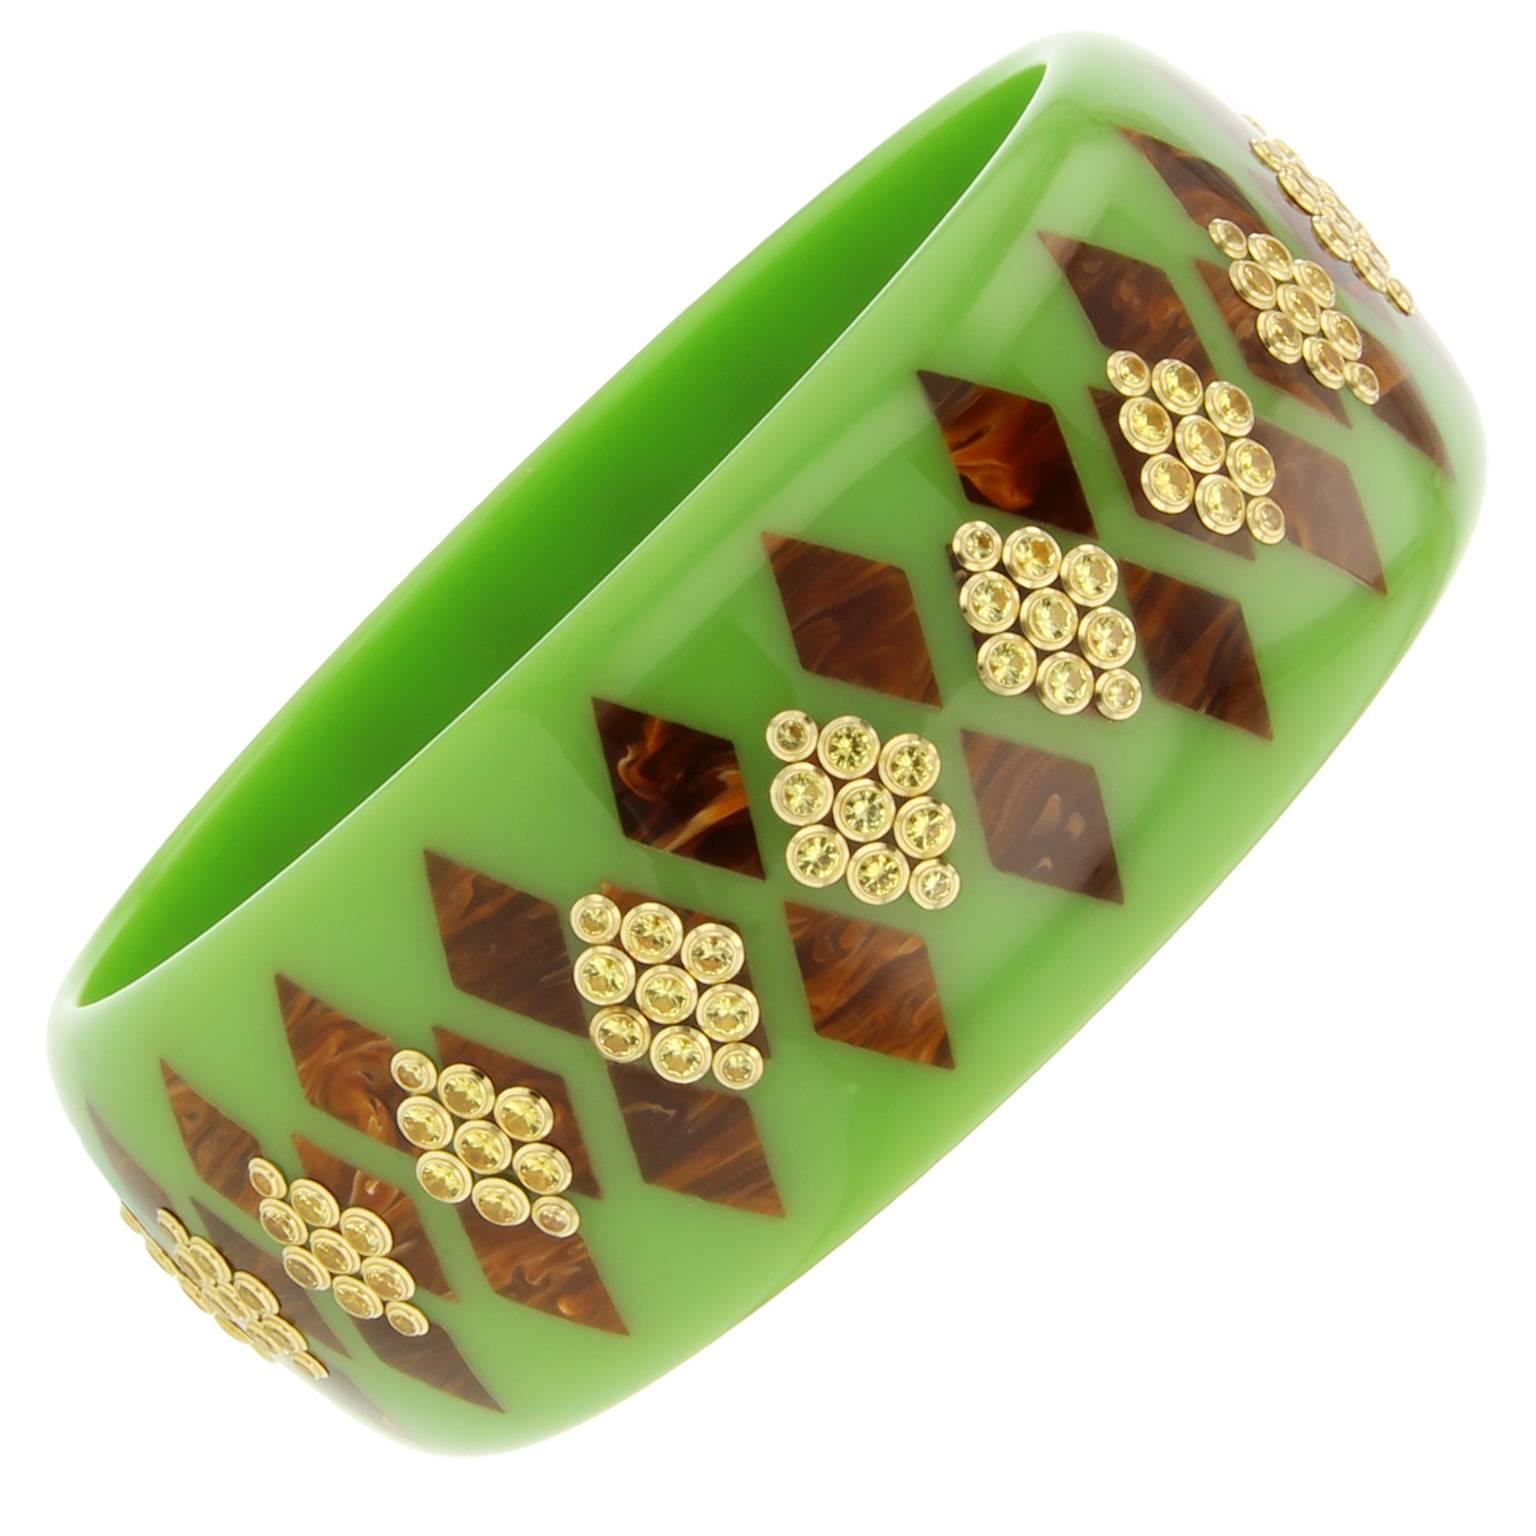 This solid green and marbled brown vintage bakelite bangle is decorated with diamond-shaped inlay work.  Clusters of yellow sapphire bezel-set in 18k yellow gold echo the diamond shape pattern. 

Full details below:
• From the Mark Davis Collector